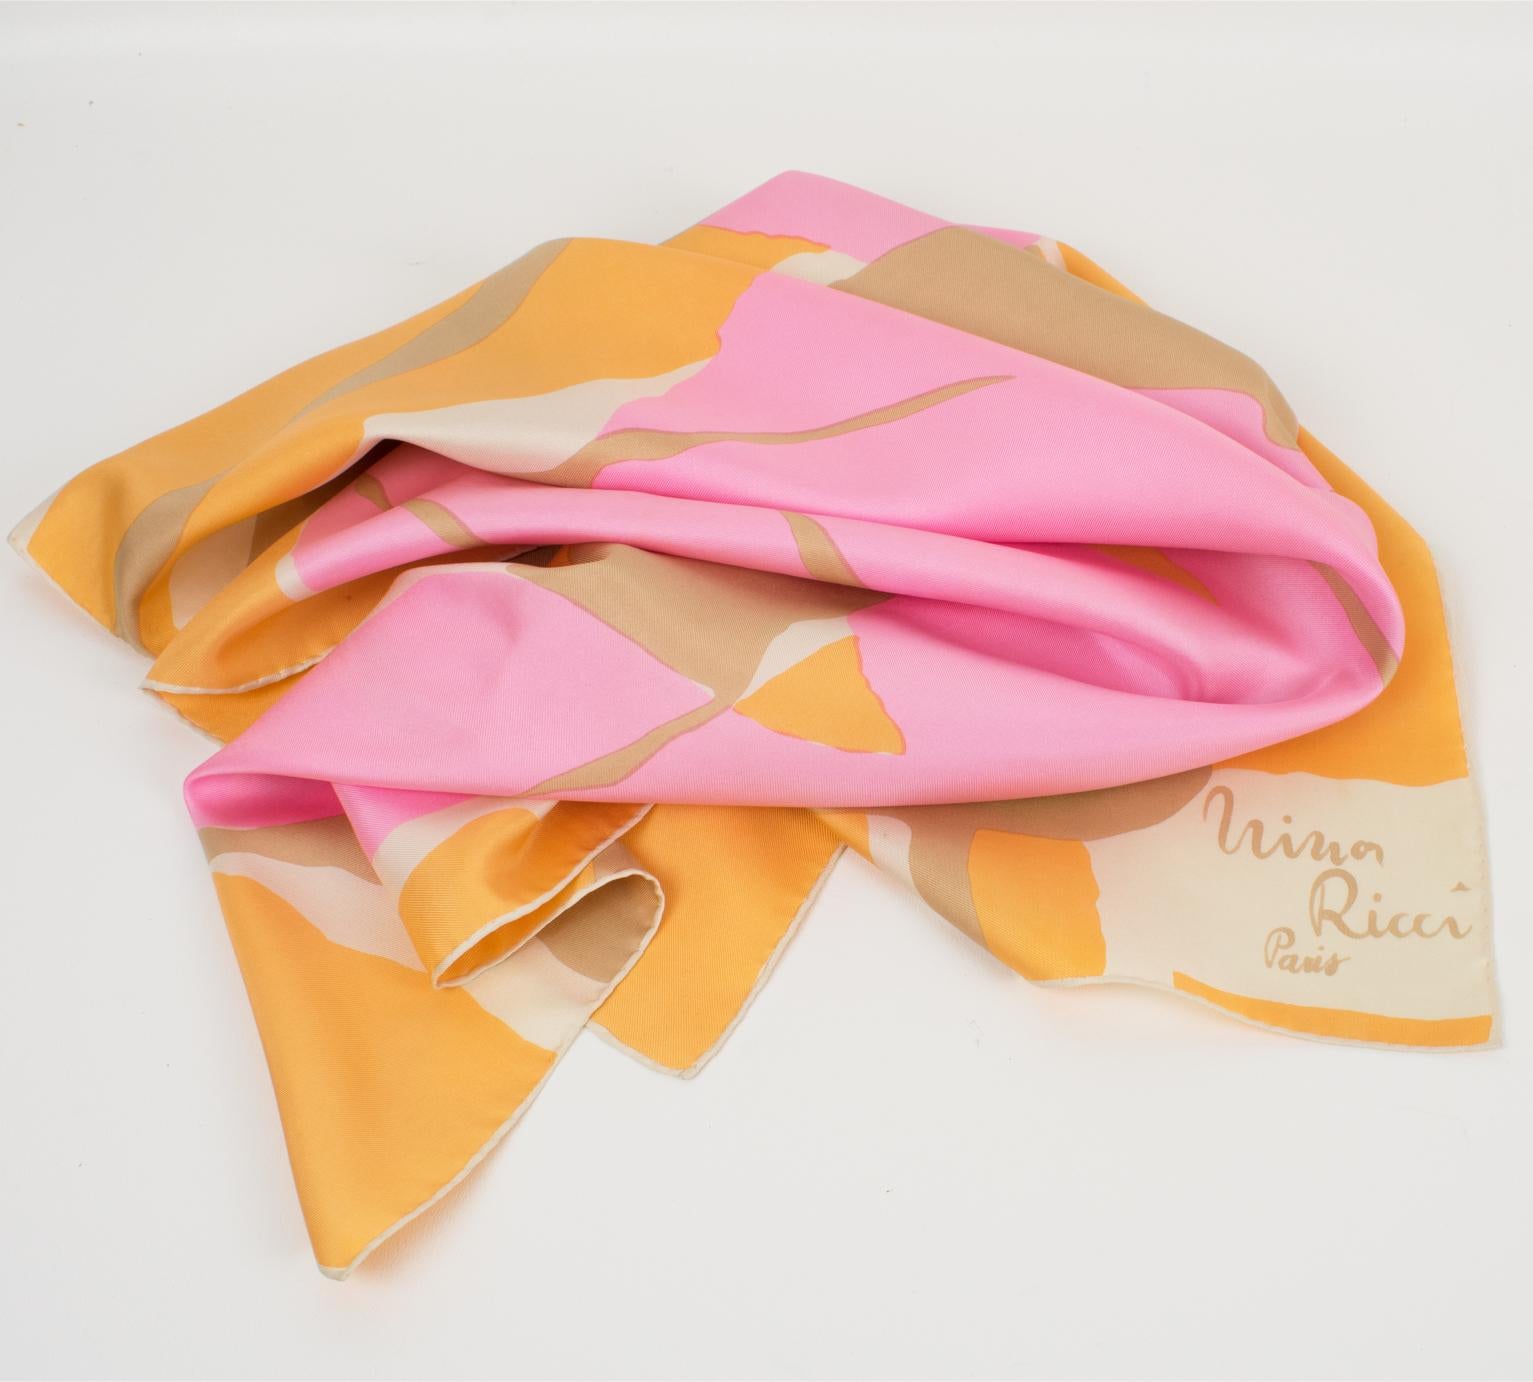 Nina Ricci Paris Silk Scarf Abstract 1970s Print in Pink and Orange In Good Condition For Sale In Atlanta, GA